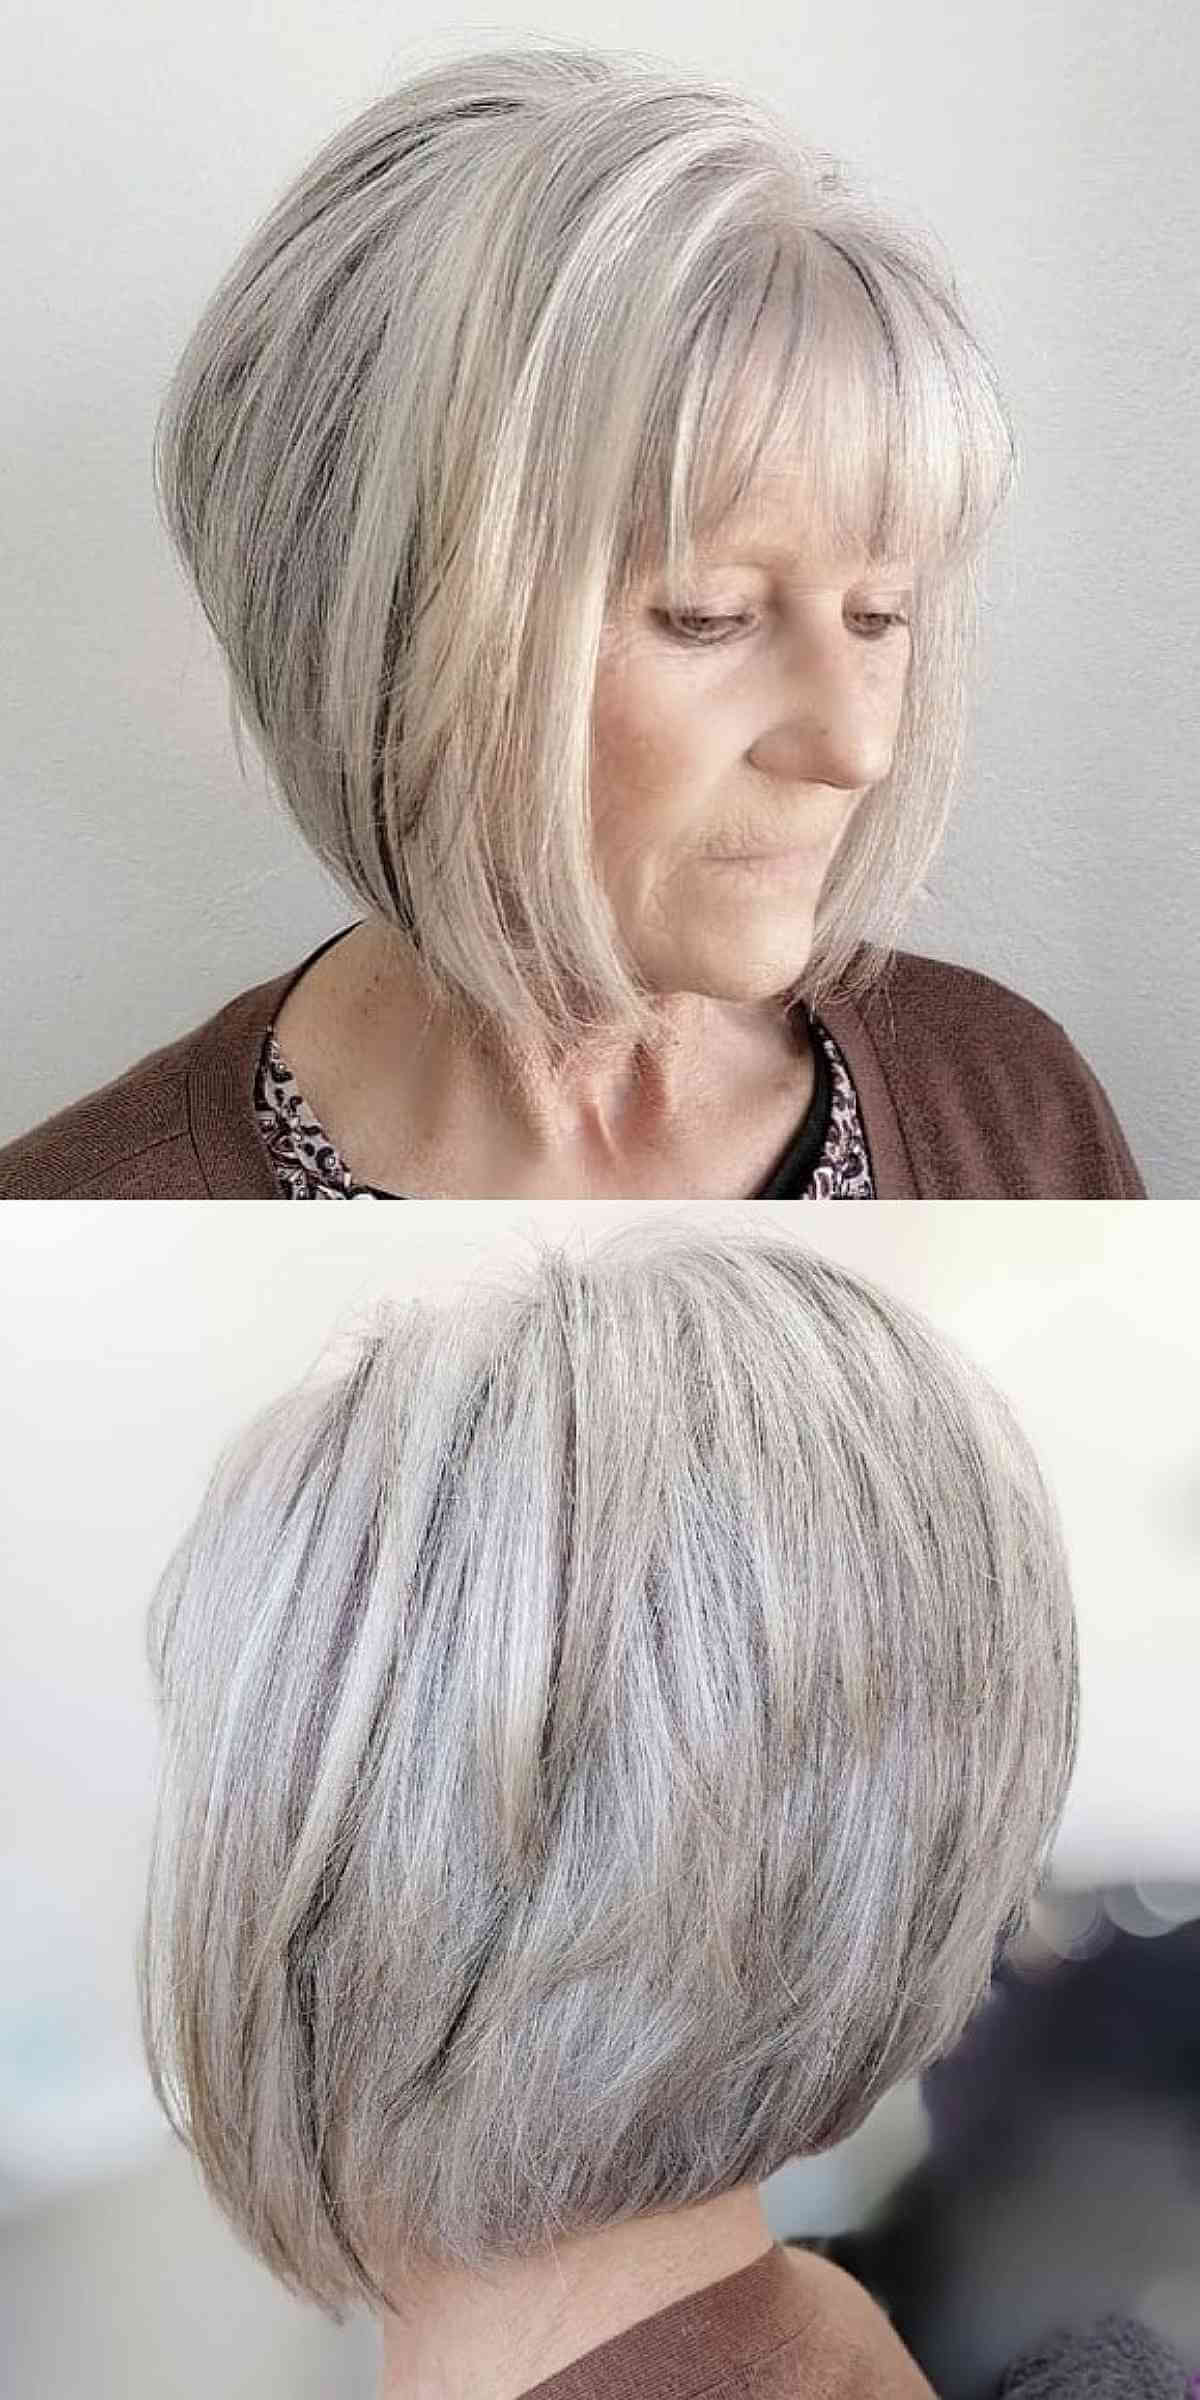 Short Layered Bob with Wispy Bangs for Women 50 and Up